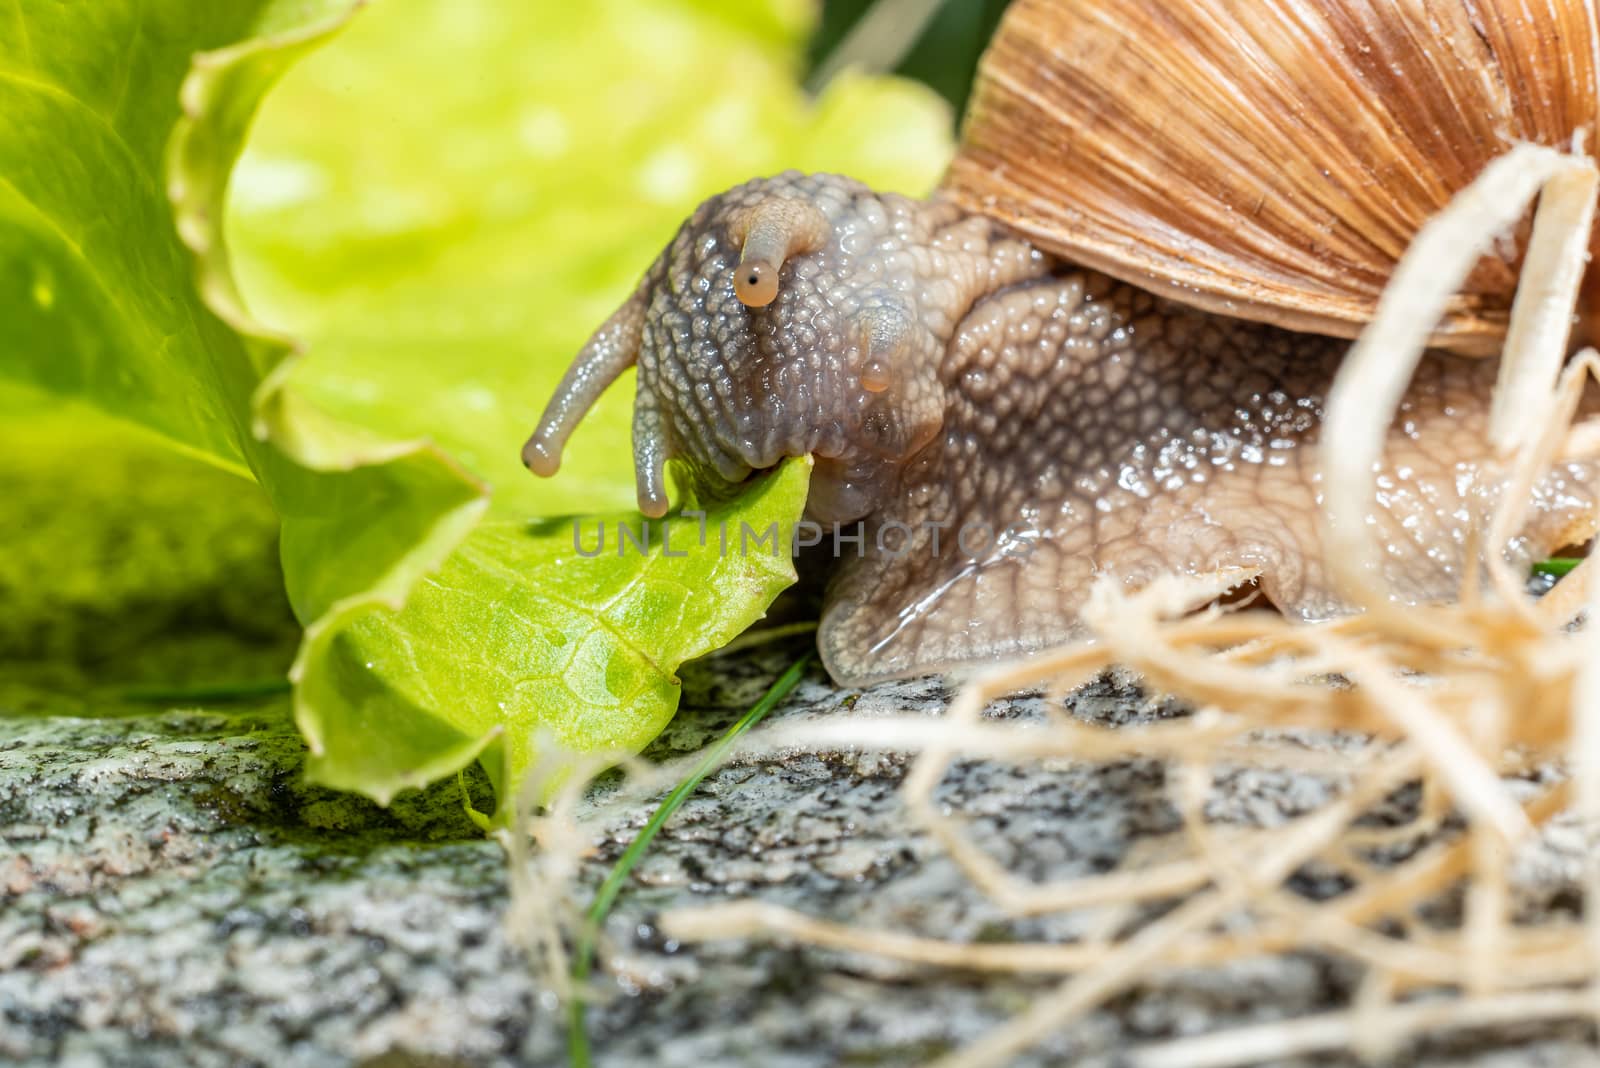 Macro close-up of a Burgundy snail eating a lettuce leaf - biting of a piece of the leaf - closing the mouth by Umtsga